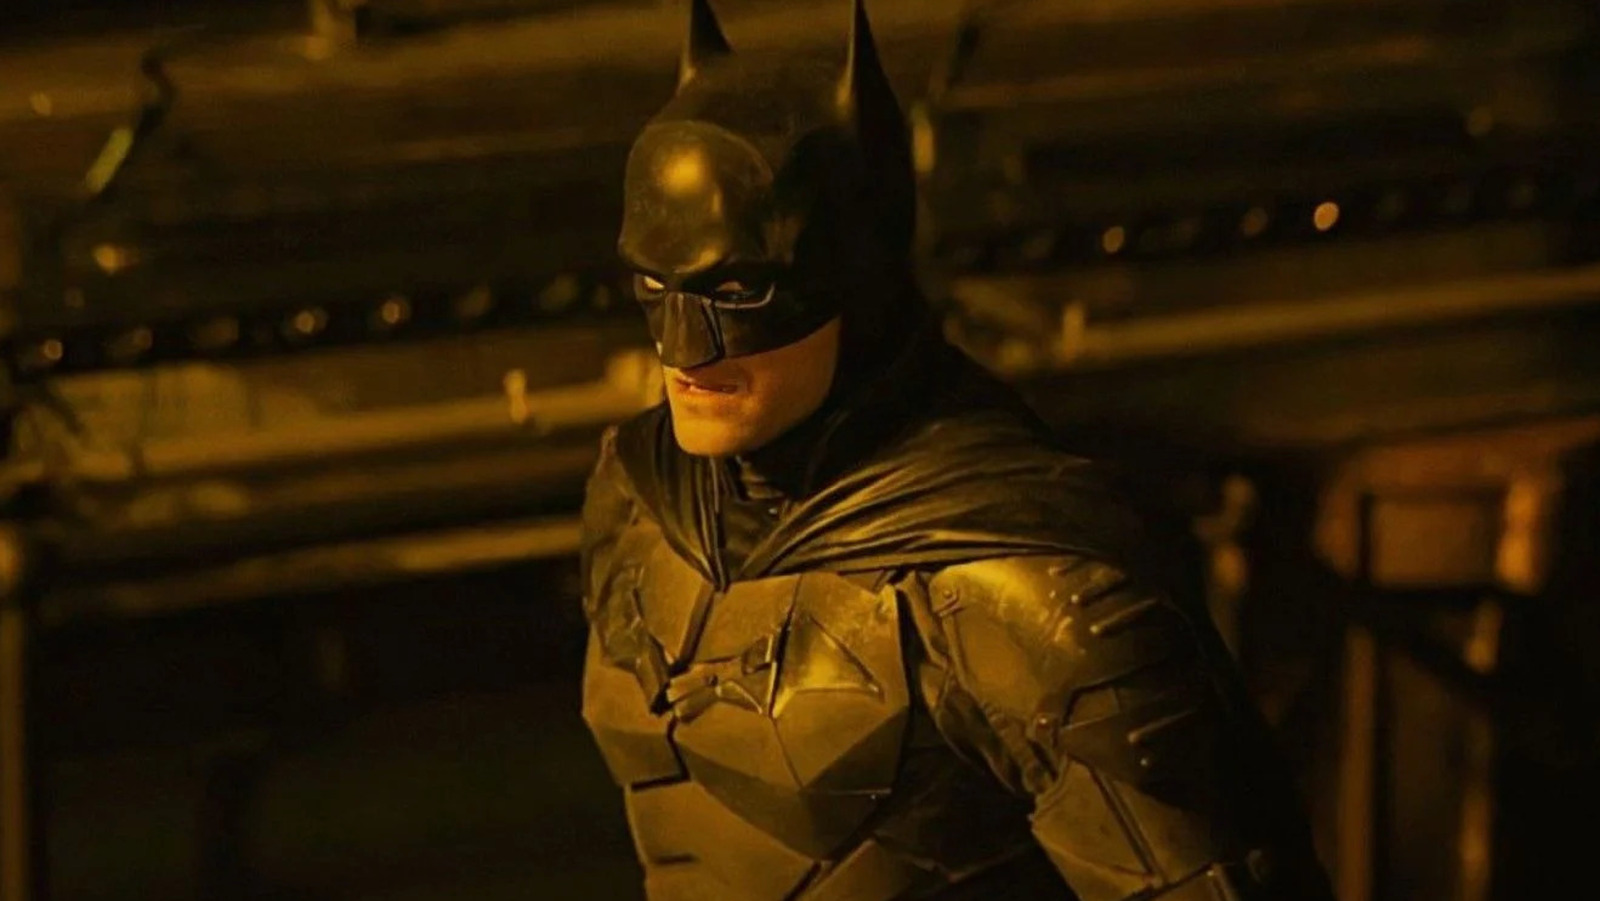 The Batman is now streaming on HBO Max